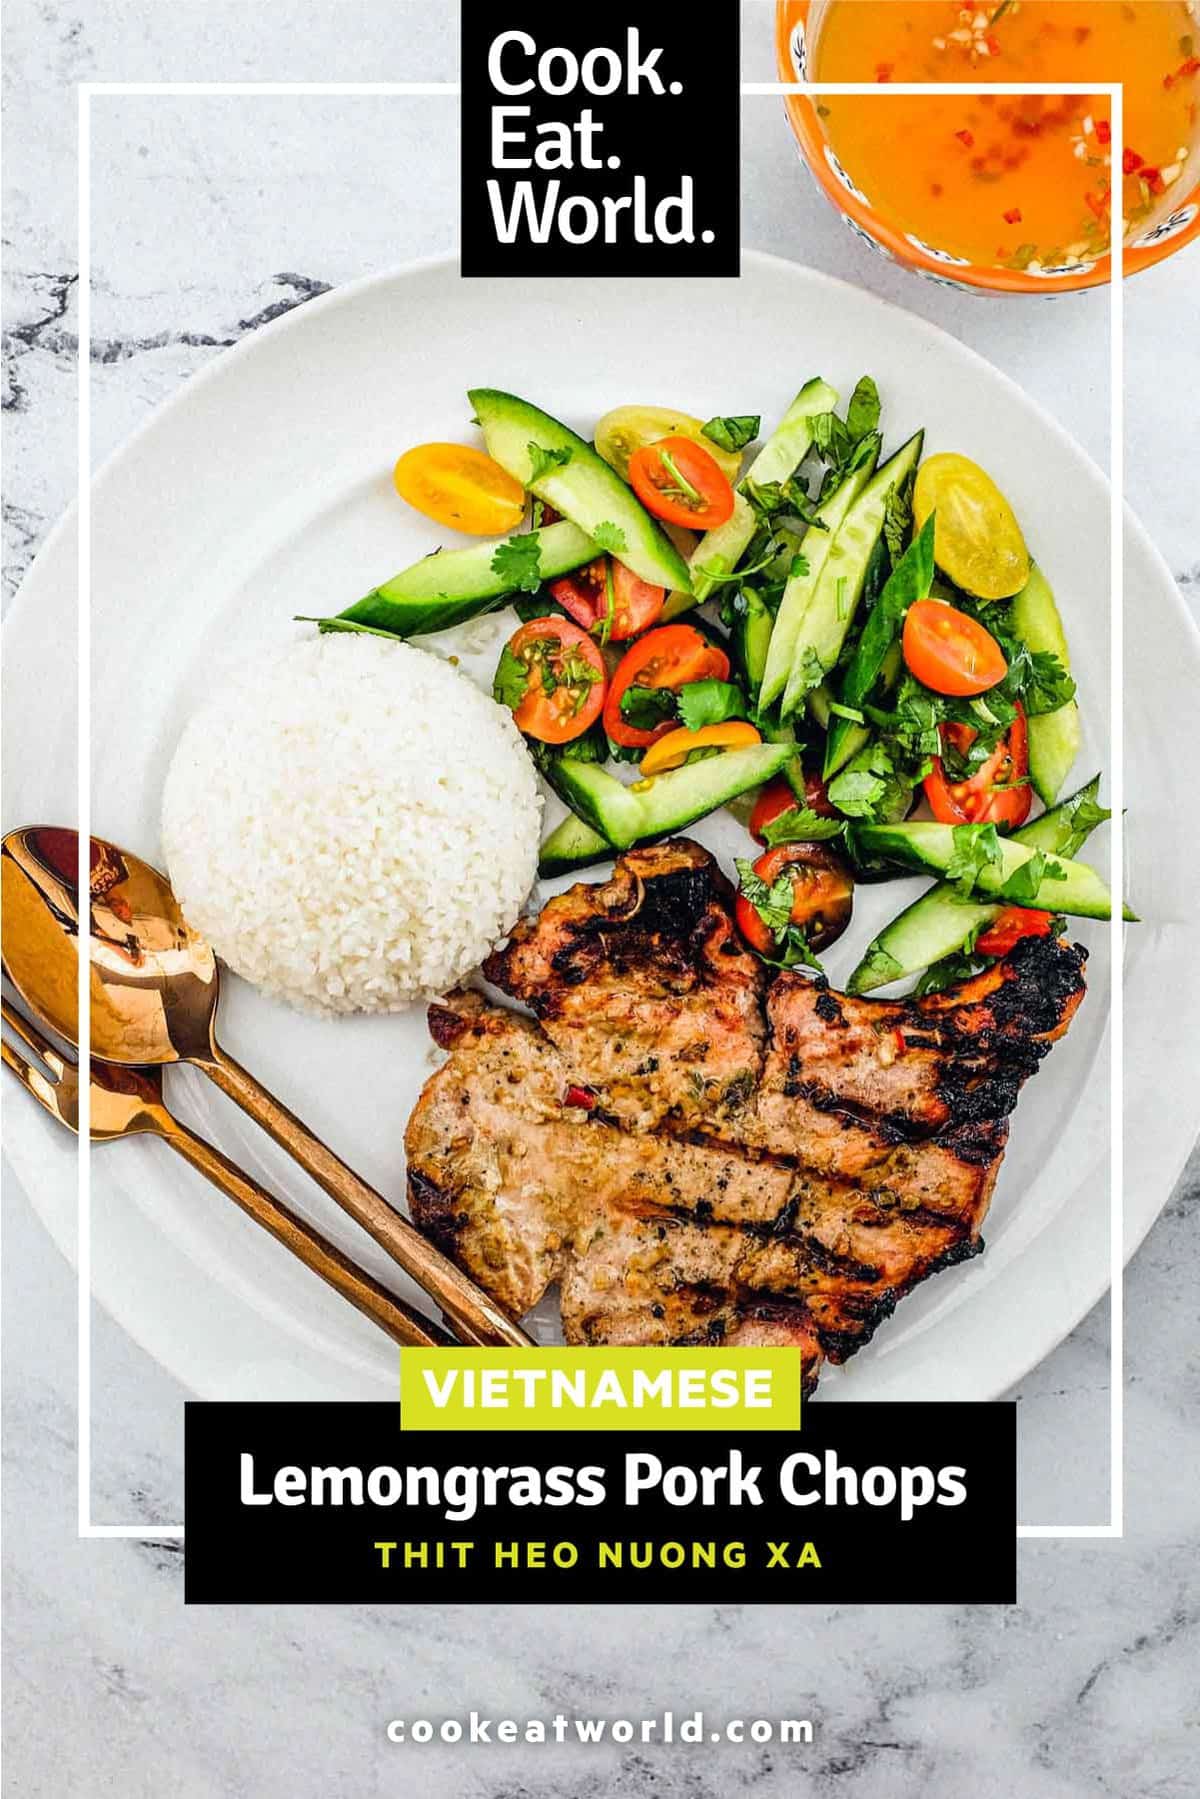 Vietnamese lemongrass pork chops with rice and salad on a plate